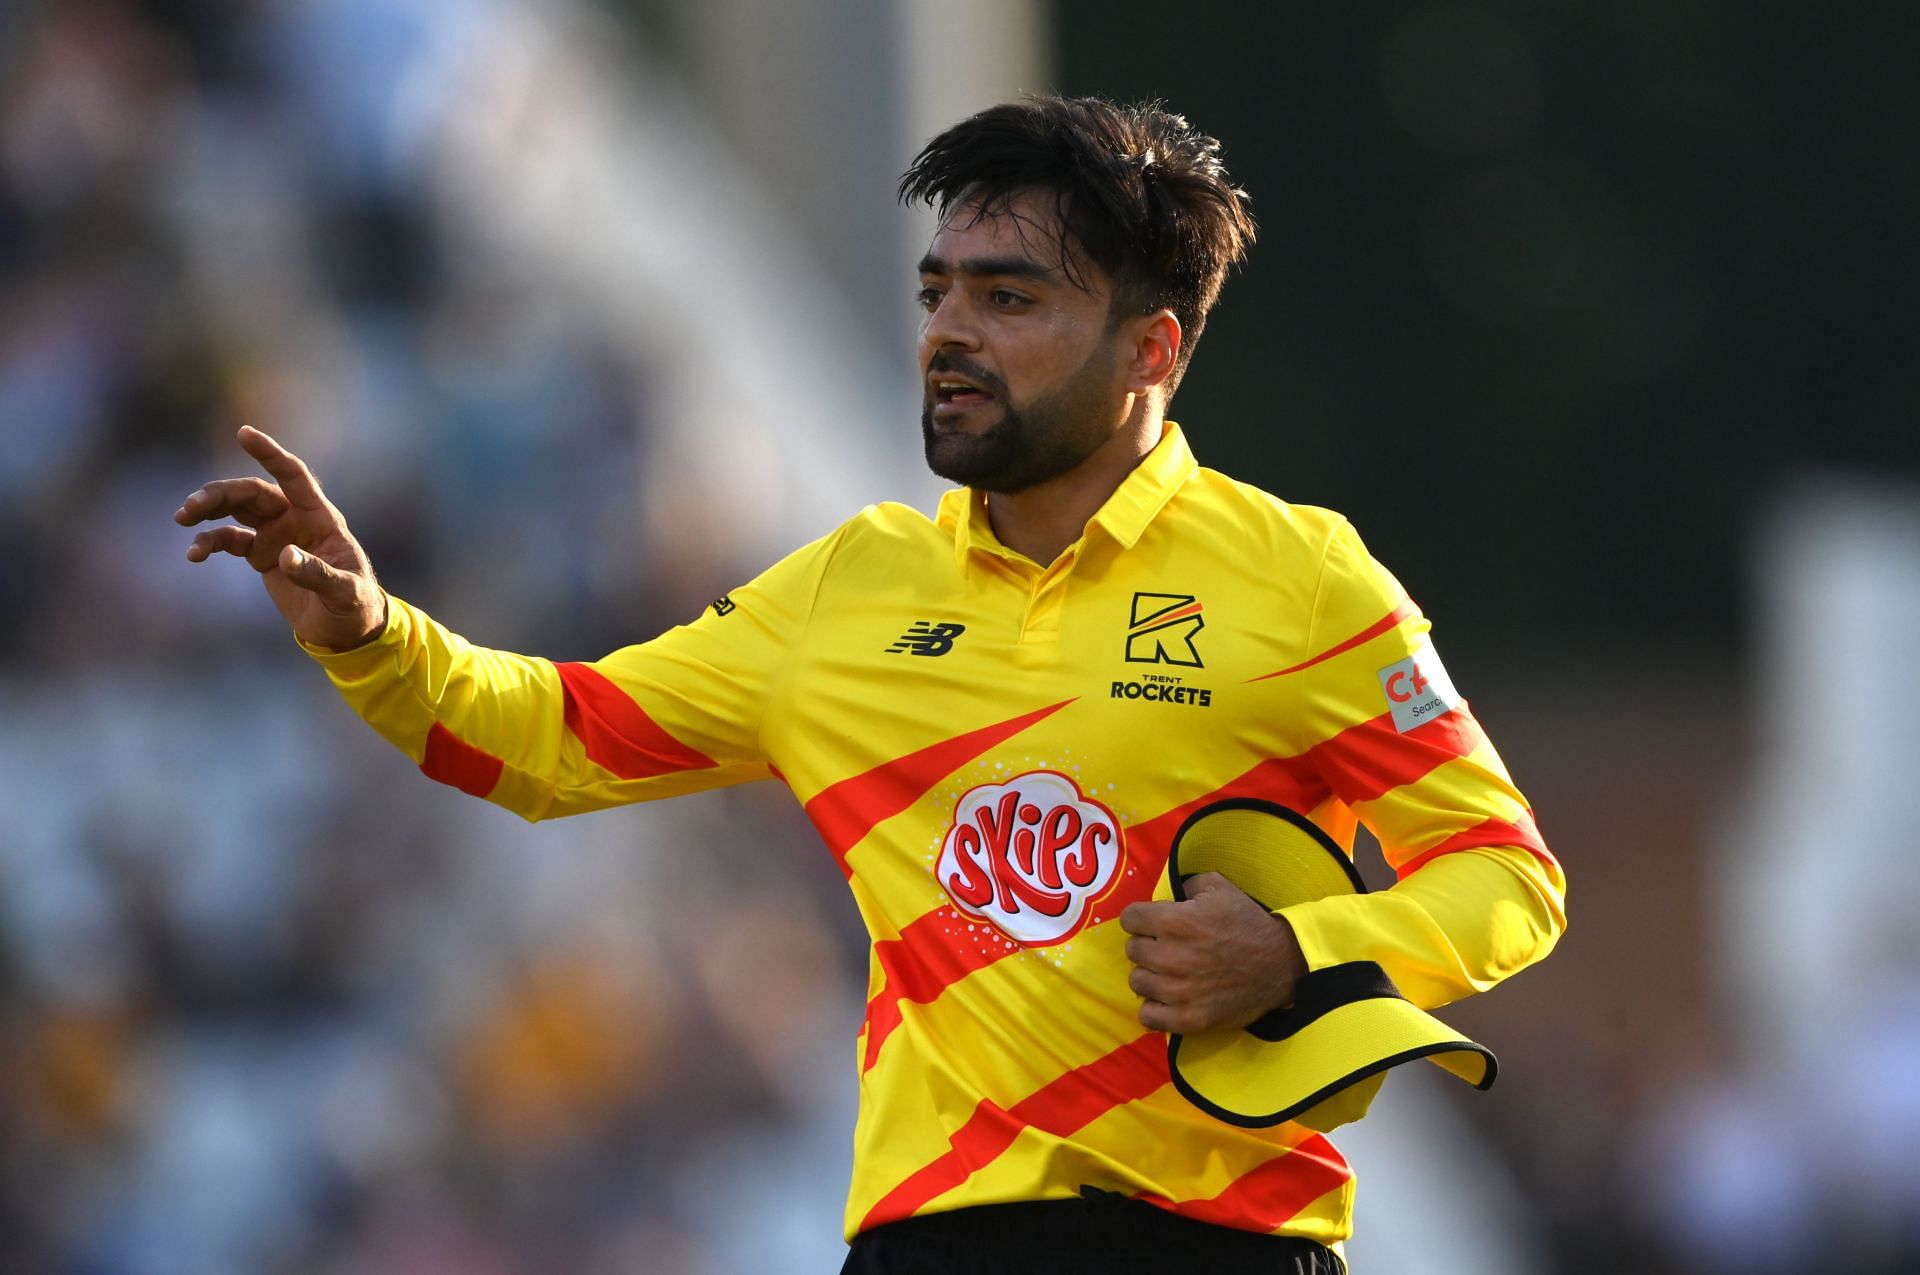 Rashid Khan was supposed to lead the Afghanistan cricket team at T20 World Cup 2021